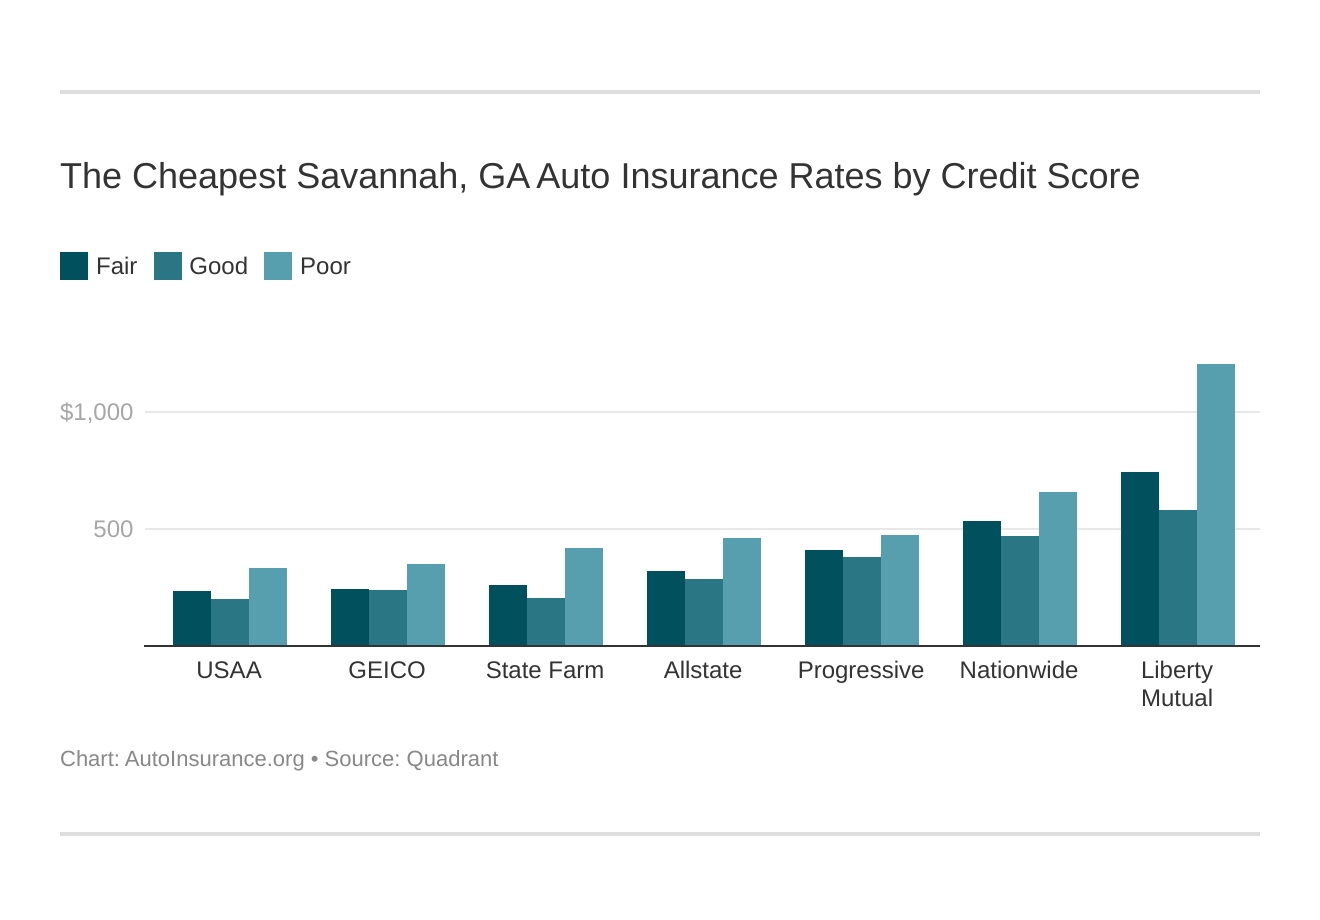 The Cheapest Savannah, GA Auto Insurance Rates by Credit Score